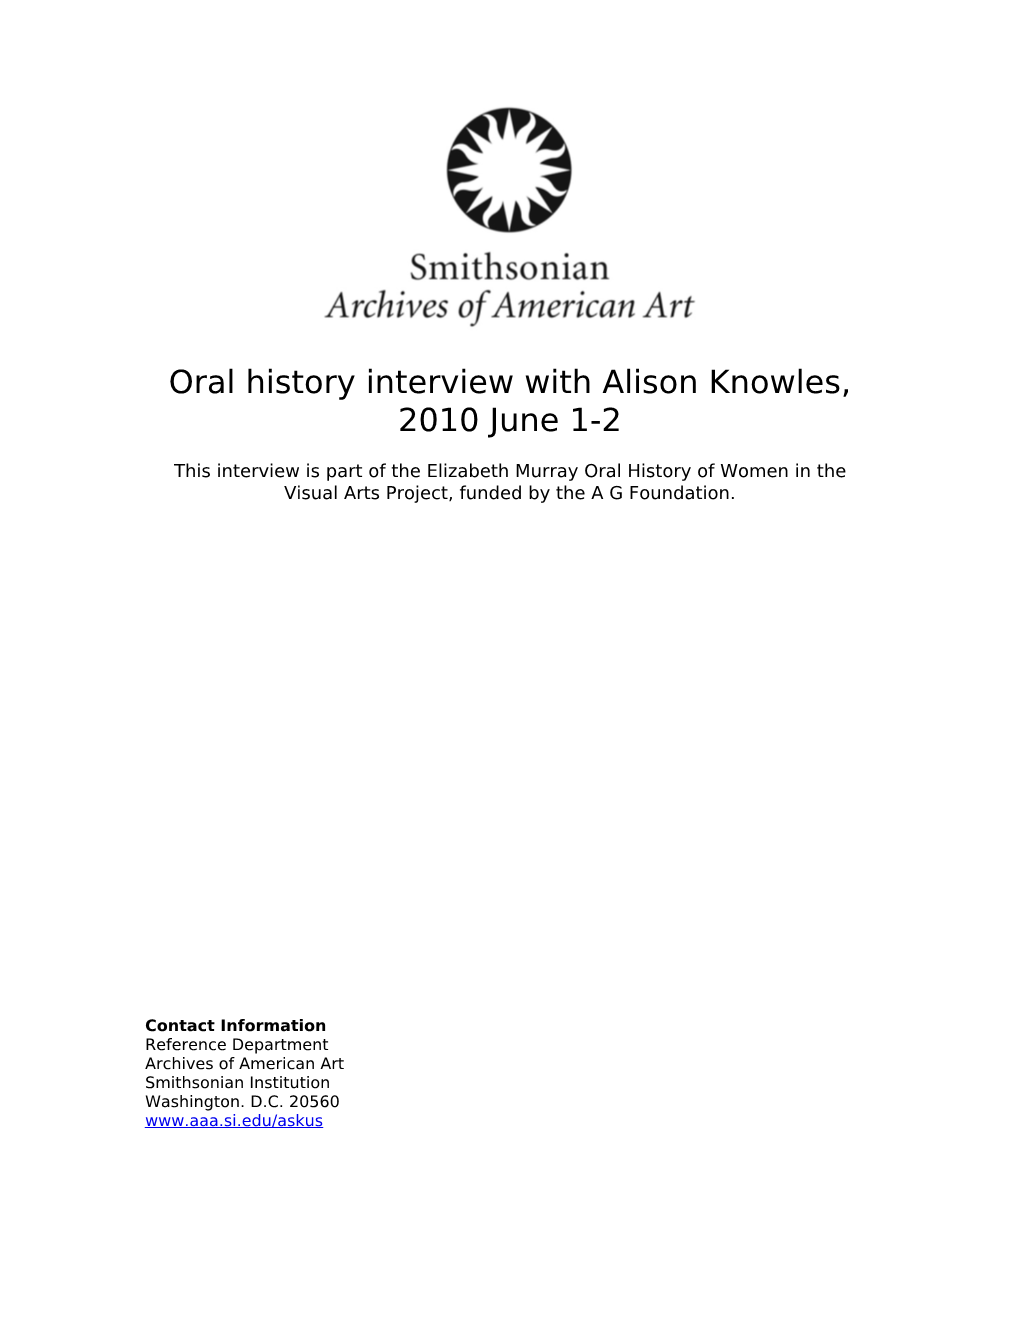 Oral History Interview with Alison Knowles, 2010 June 1-2